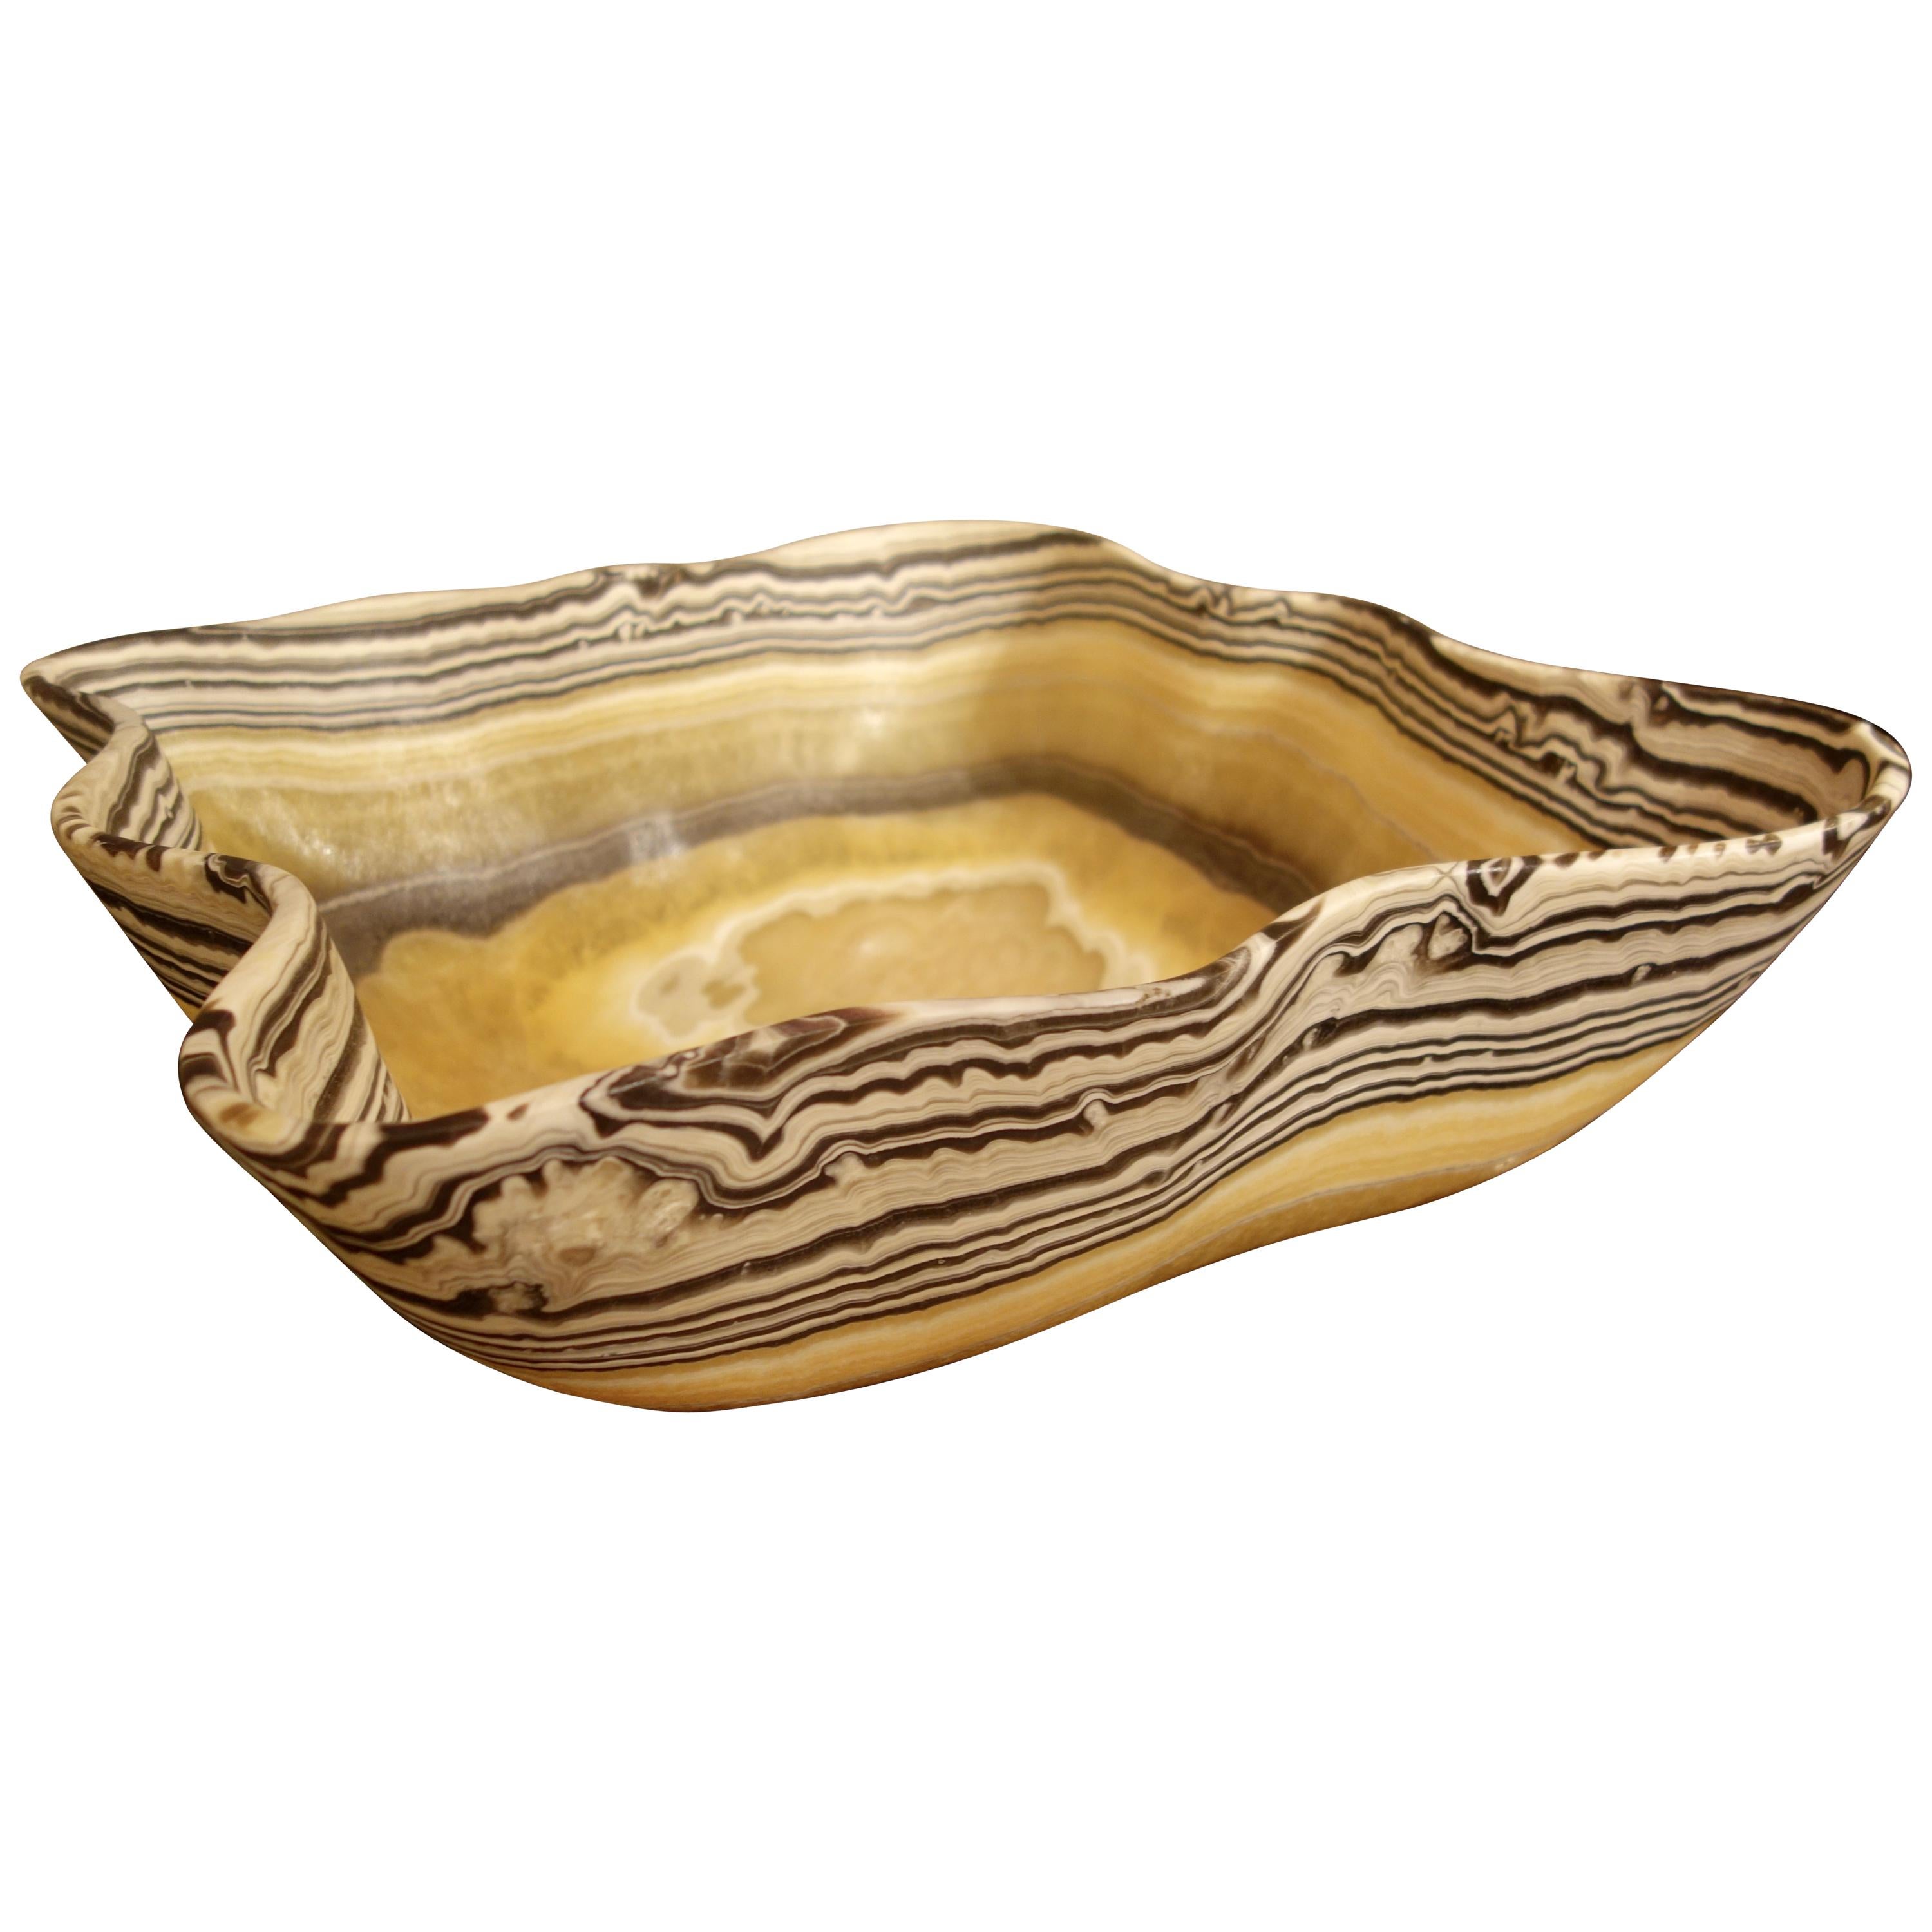 Large Hand Carved Onyx Bowl or Centerpiece in Gold, Gray and White